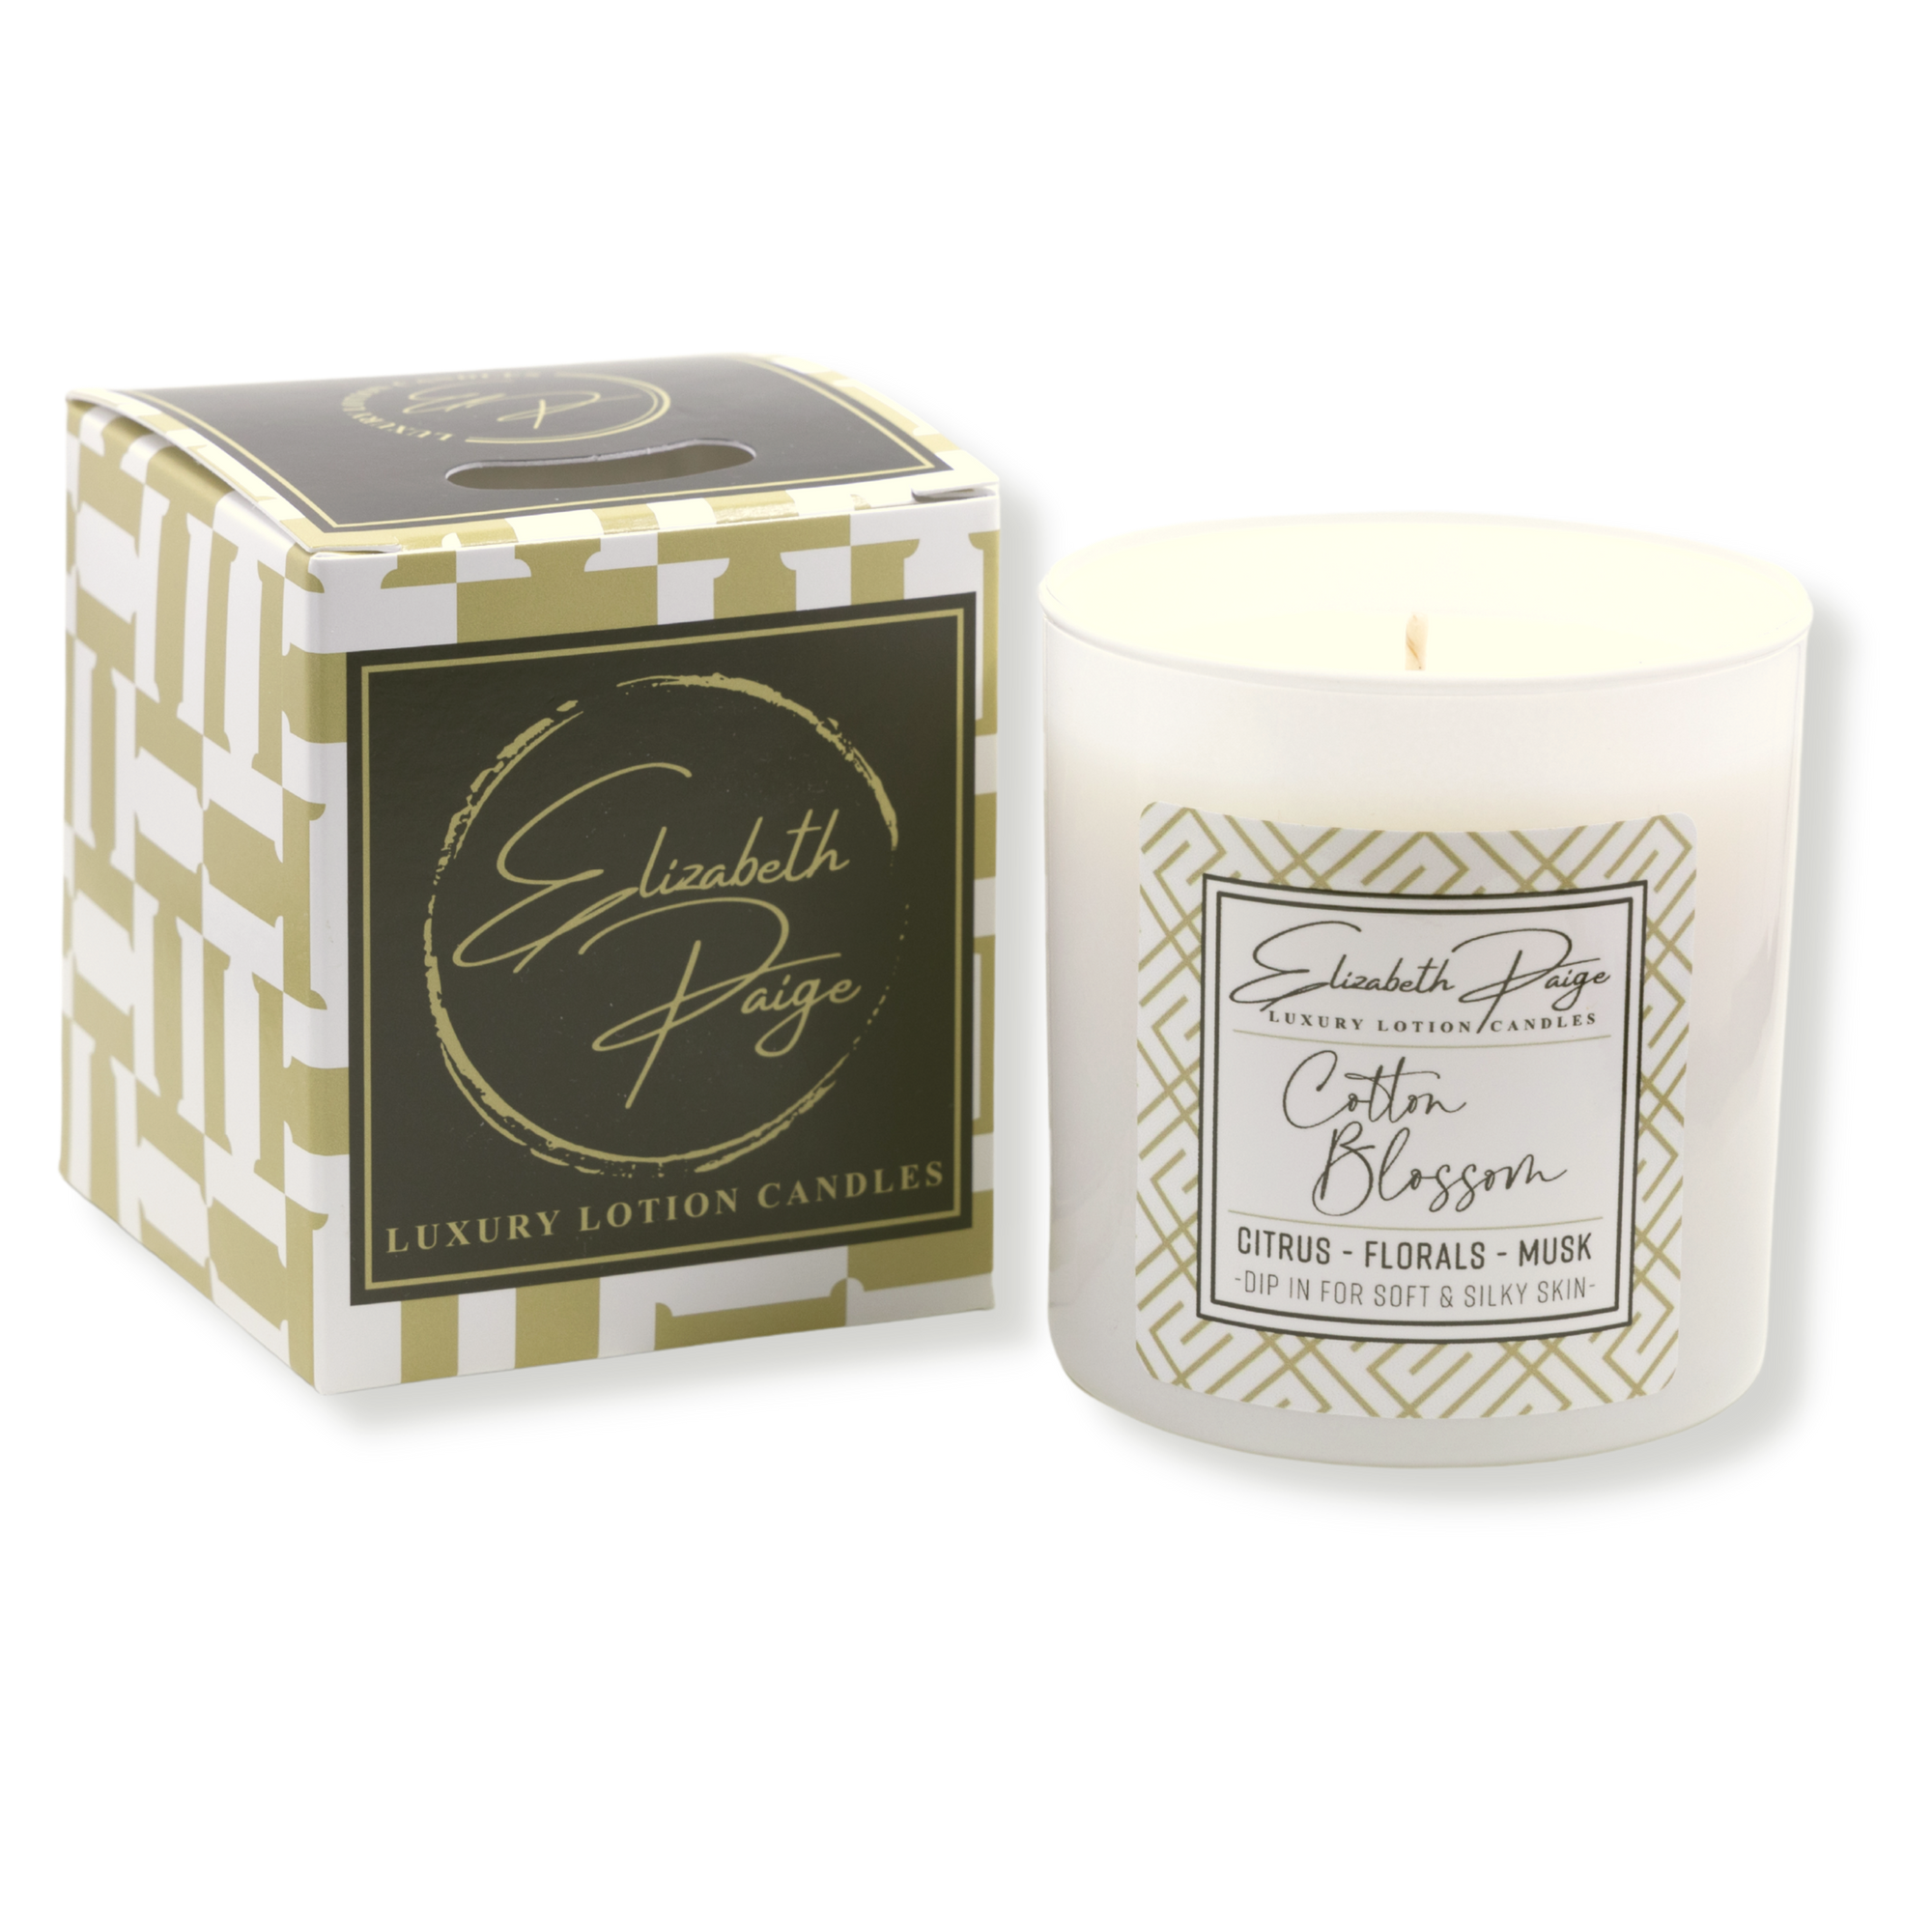 Cotton Blossom Soy Lotion Candle